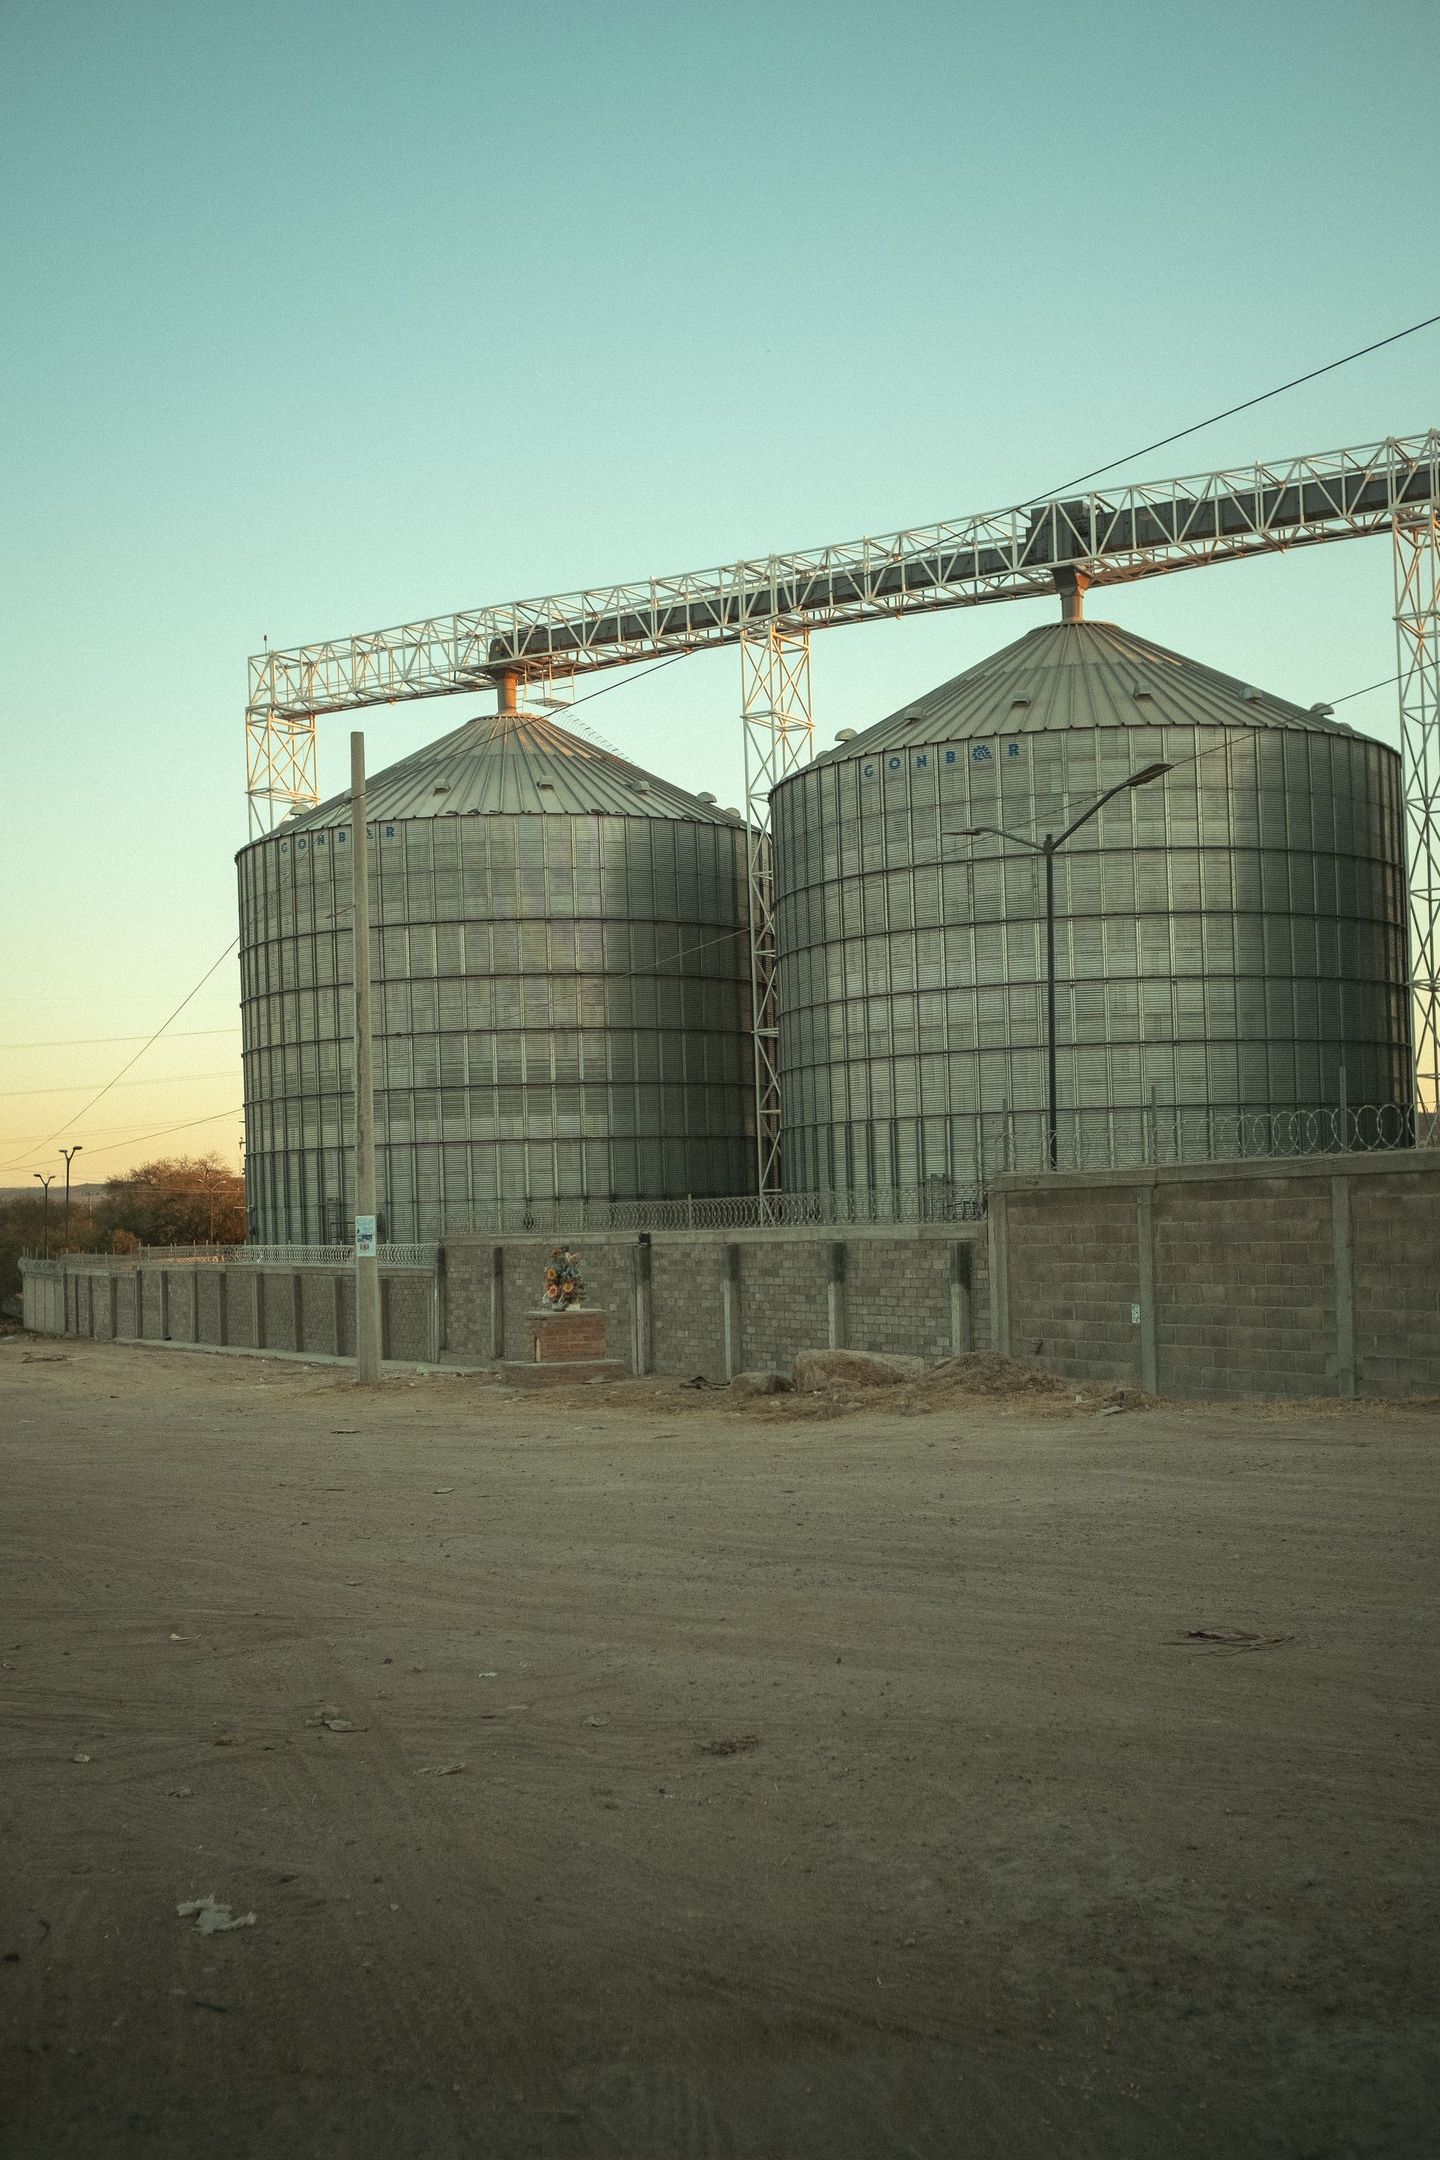 Slippery coating for silos and feed troughs